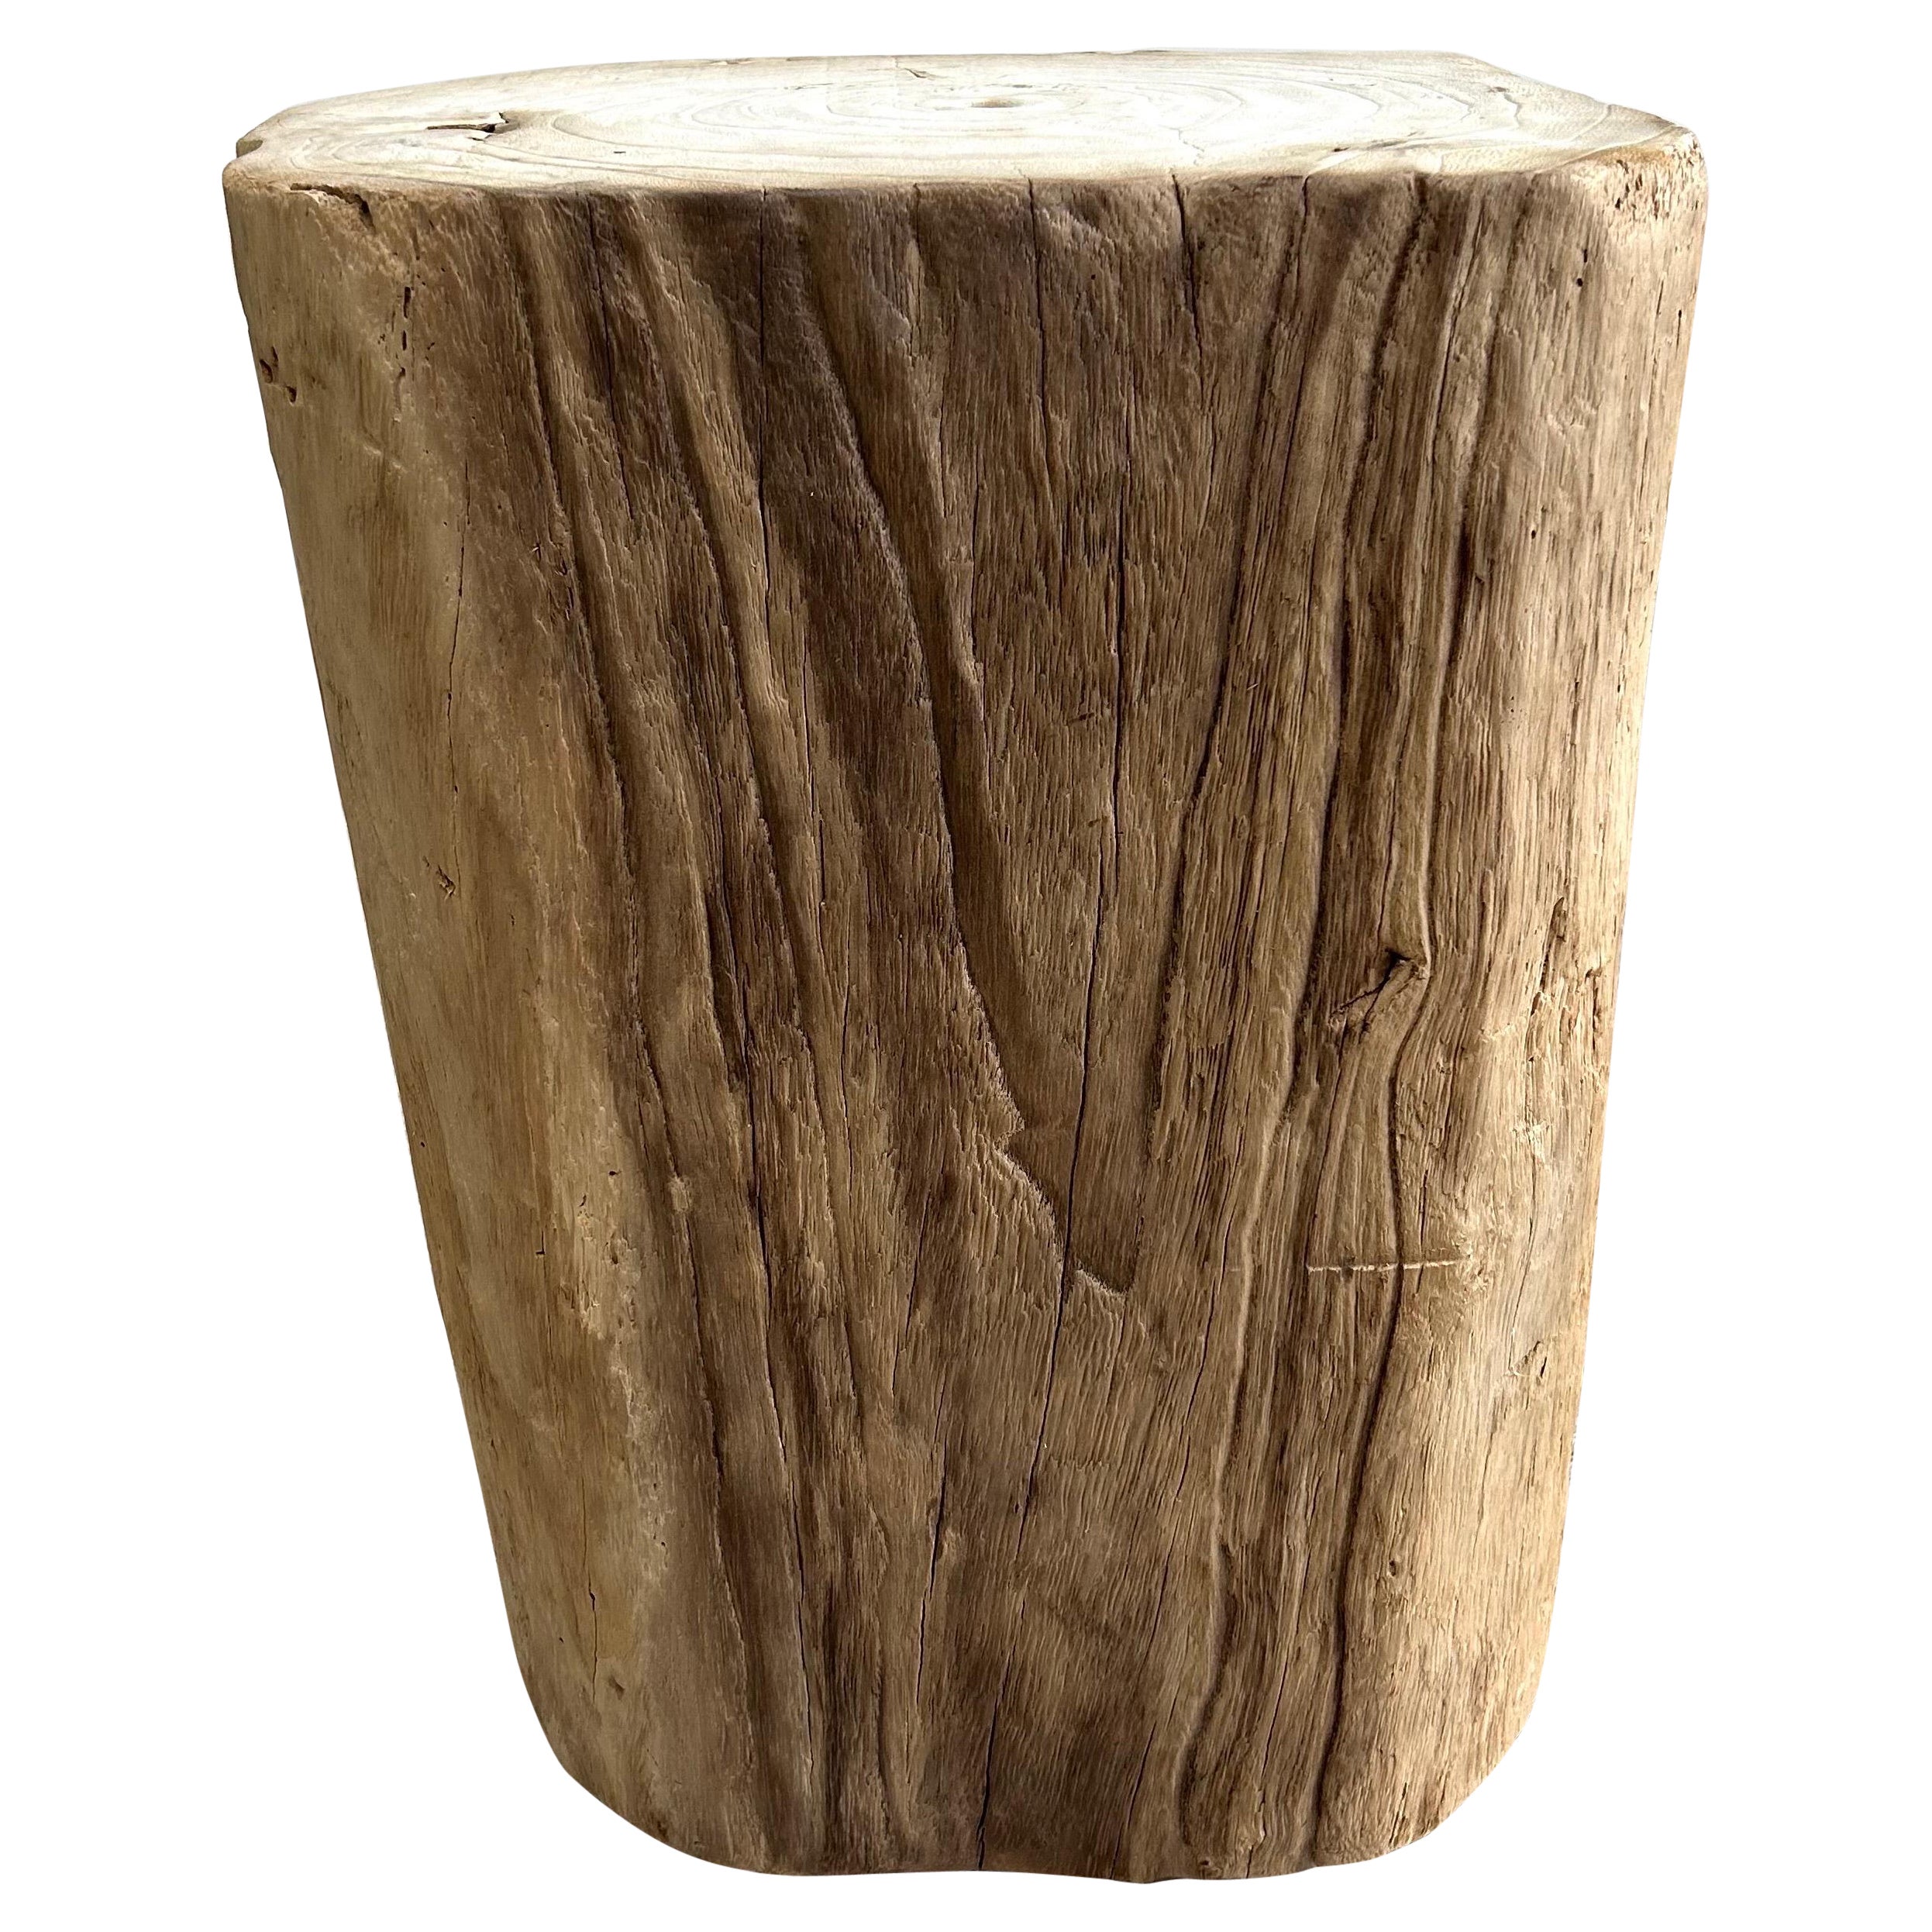 Natural Wood Stump Side Table or Stool For Sale